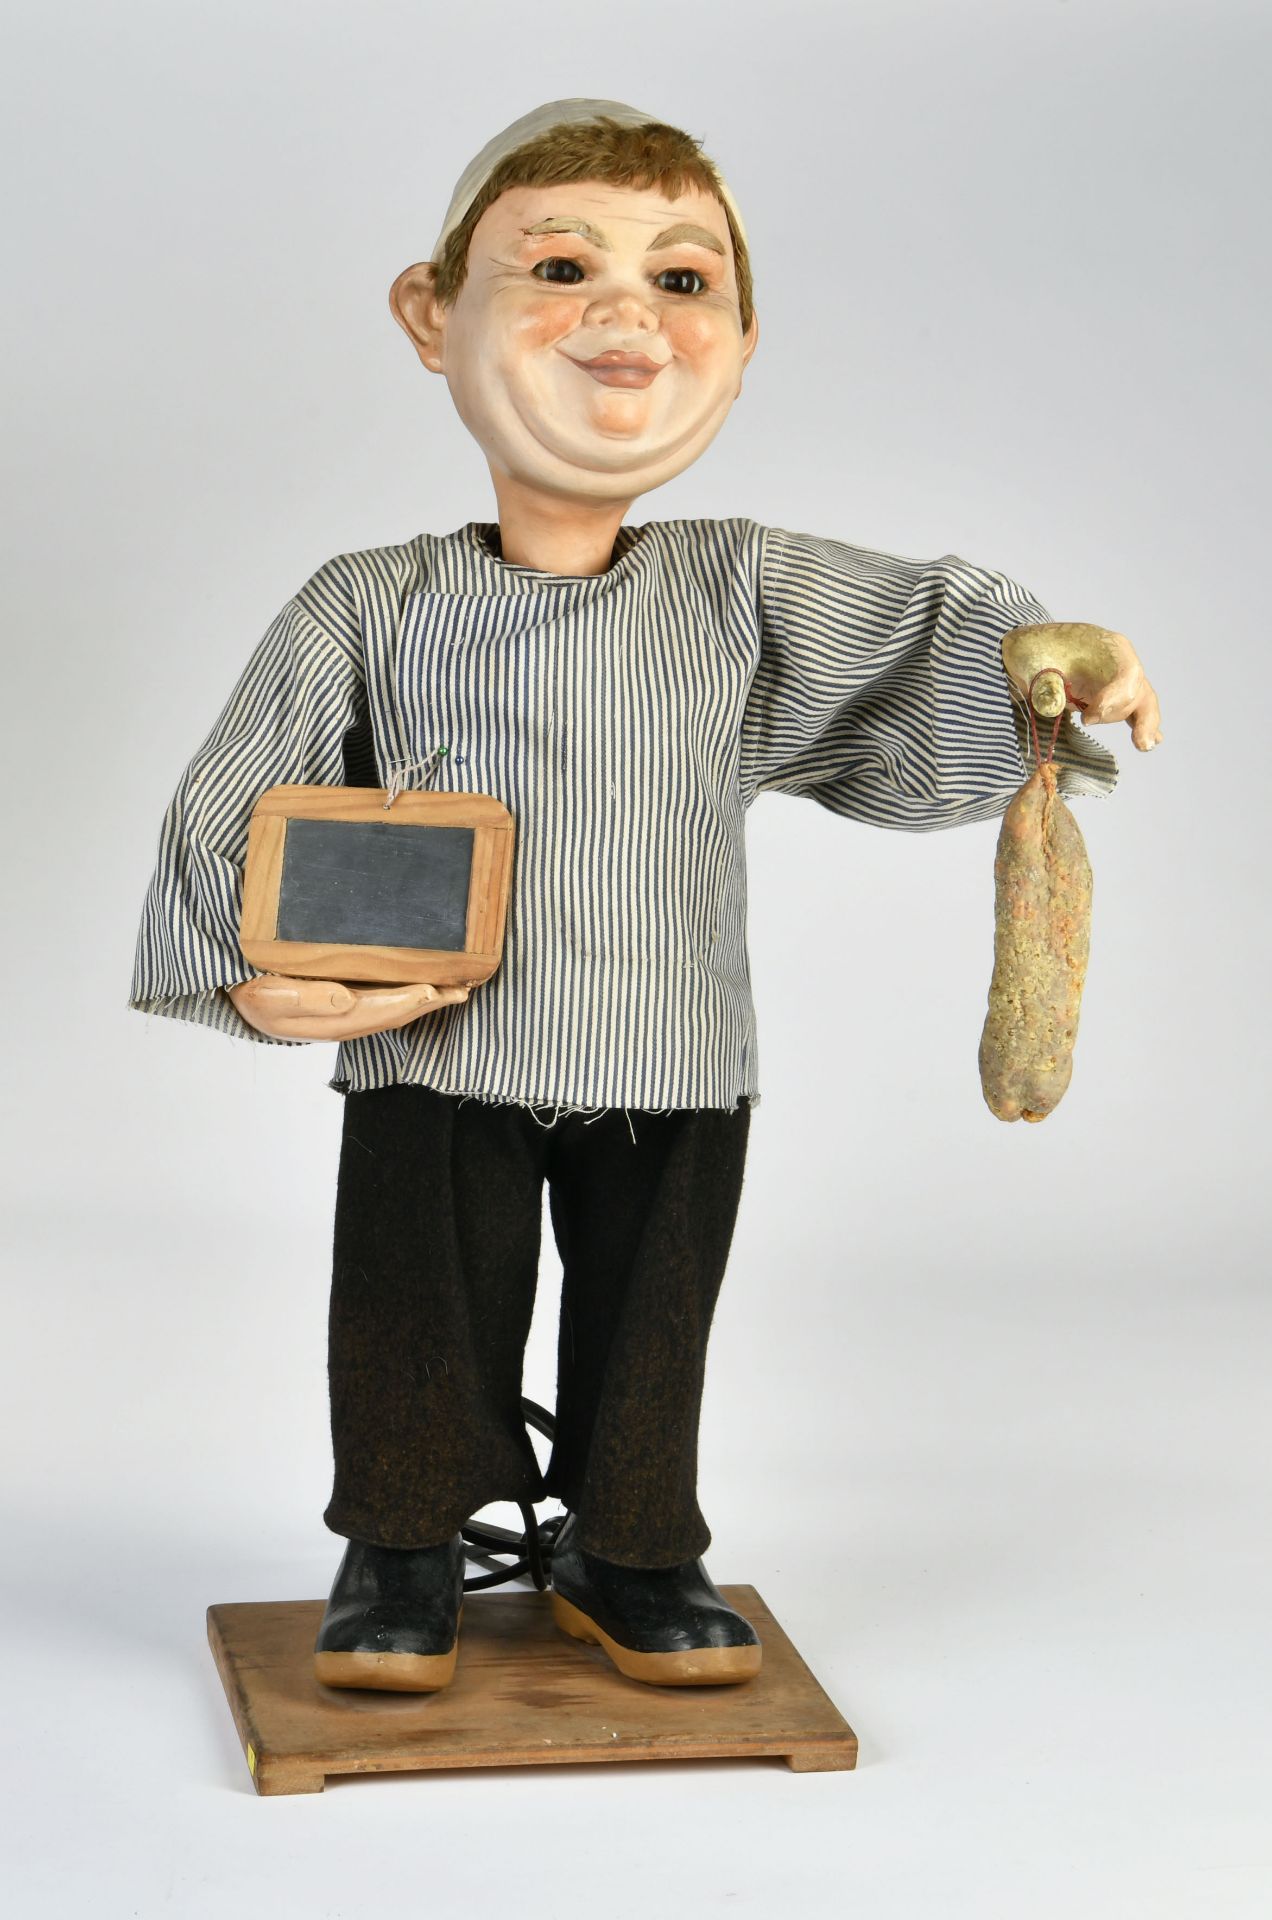 Advertising automaton "butcher", bobblehead with limber eyes, 78 cm, electric drive ok, one hand